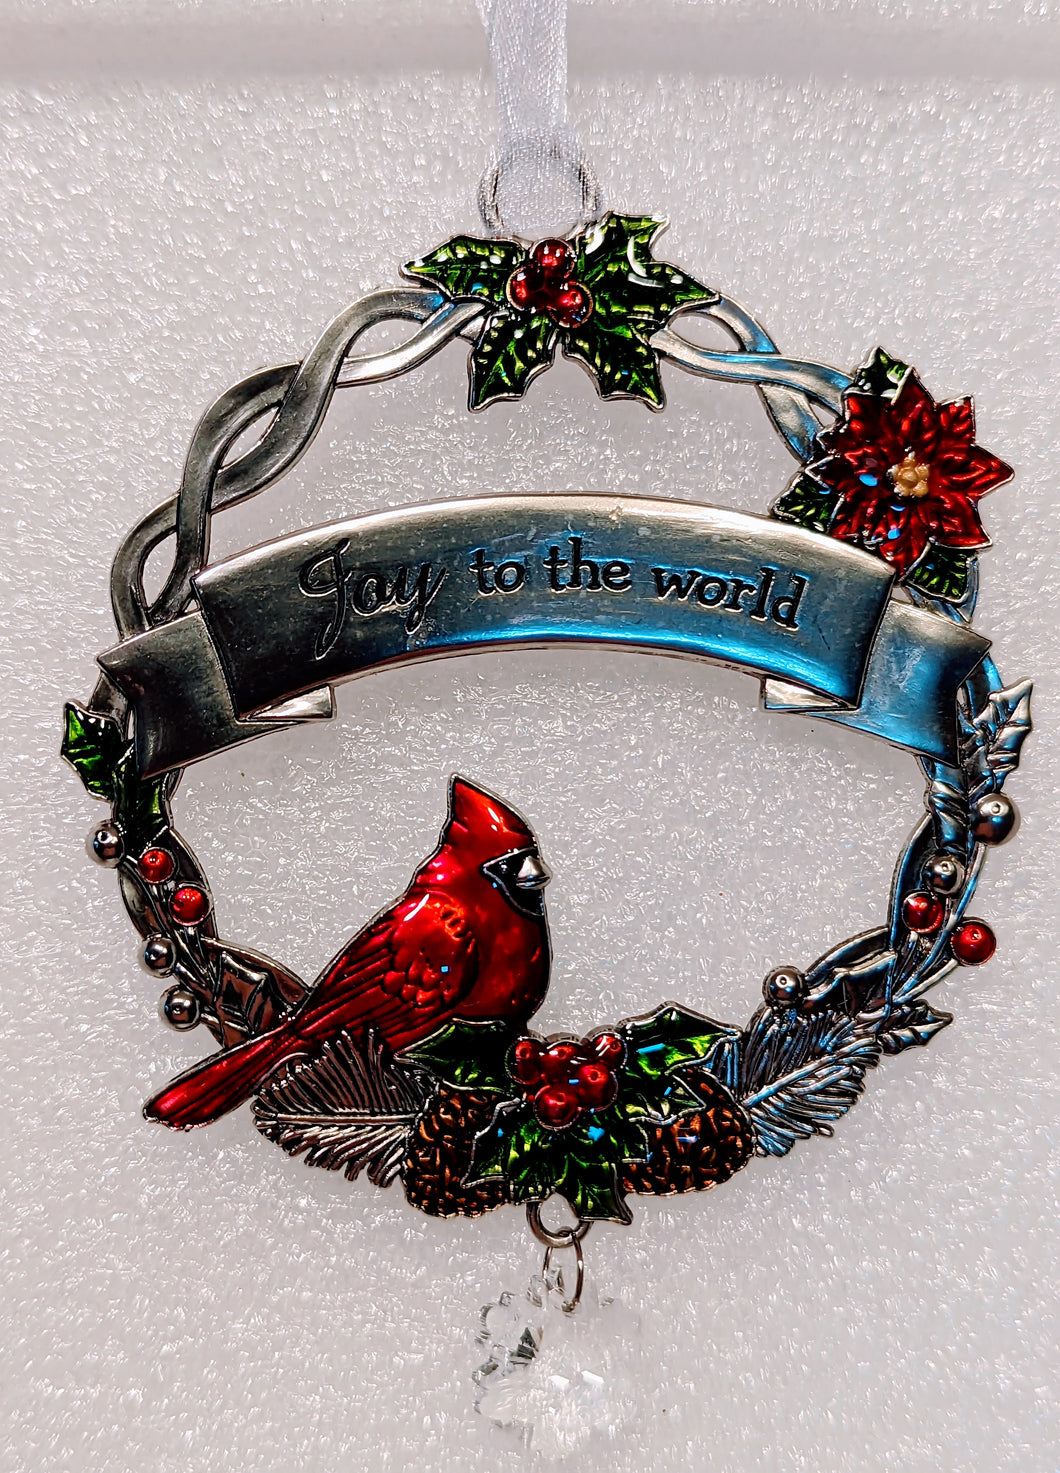 Silver Wreath Ornament with Red Cardinal & Holly - Joy To The World